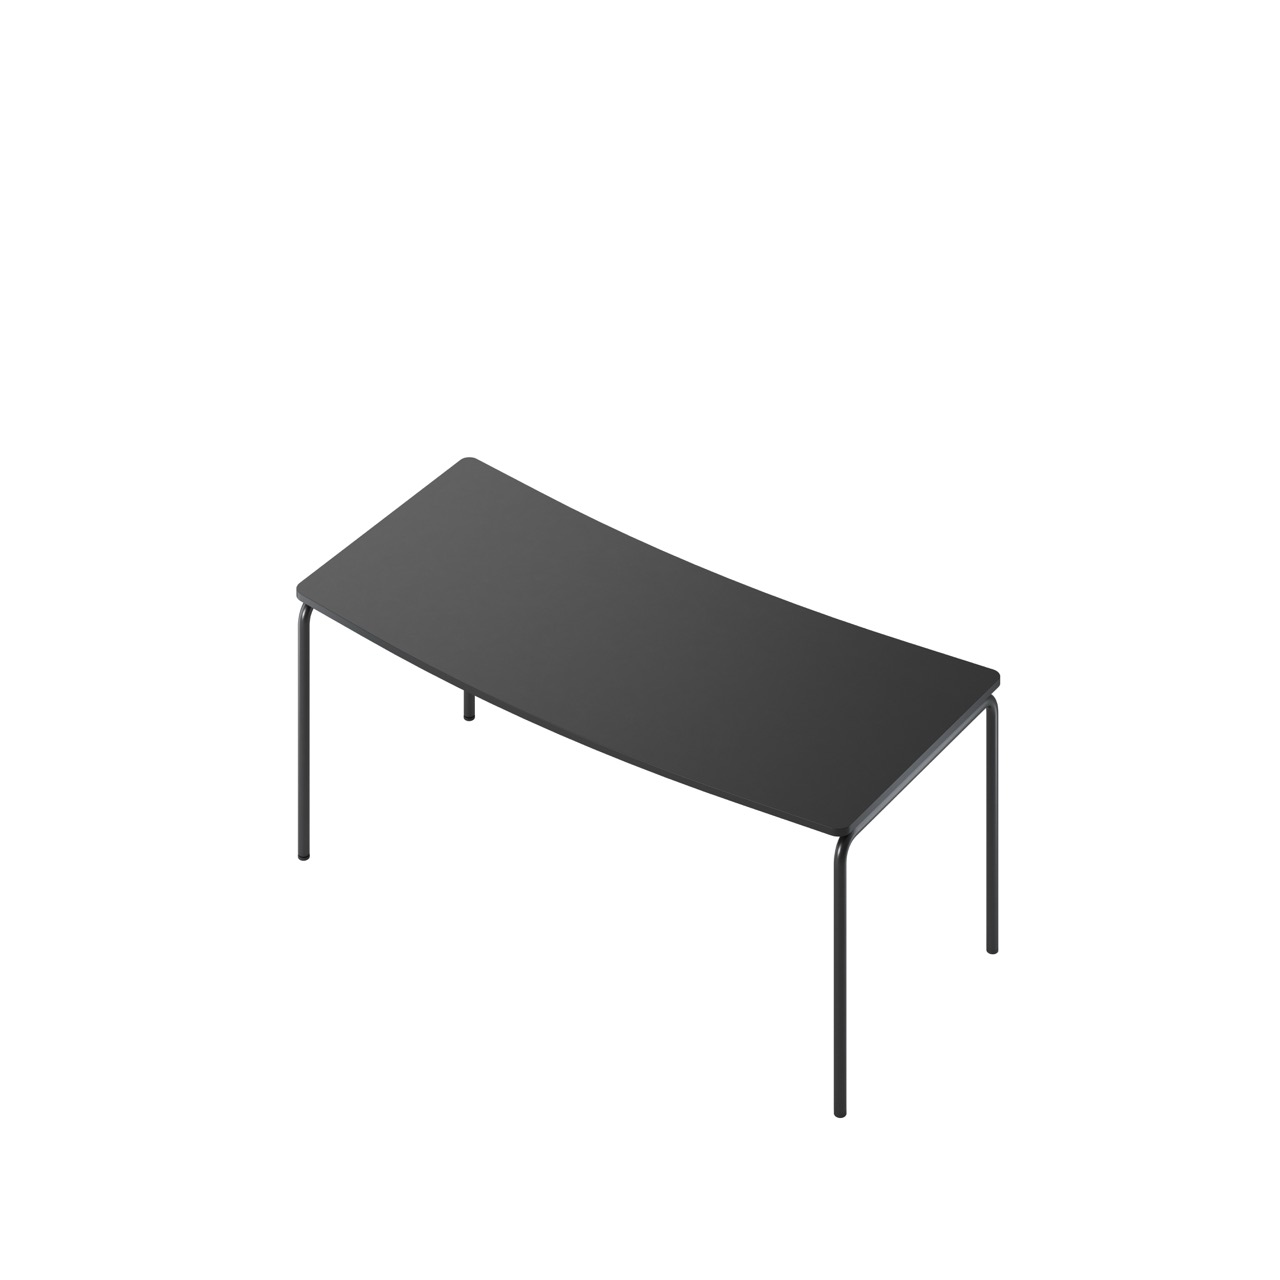 OCEE&FOUR - Tables - FourRreal 74 - 180 x 80 - Straight - Packshot Image 1 Large